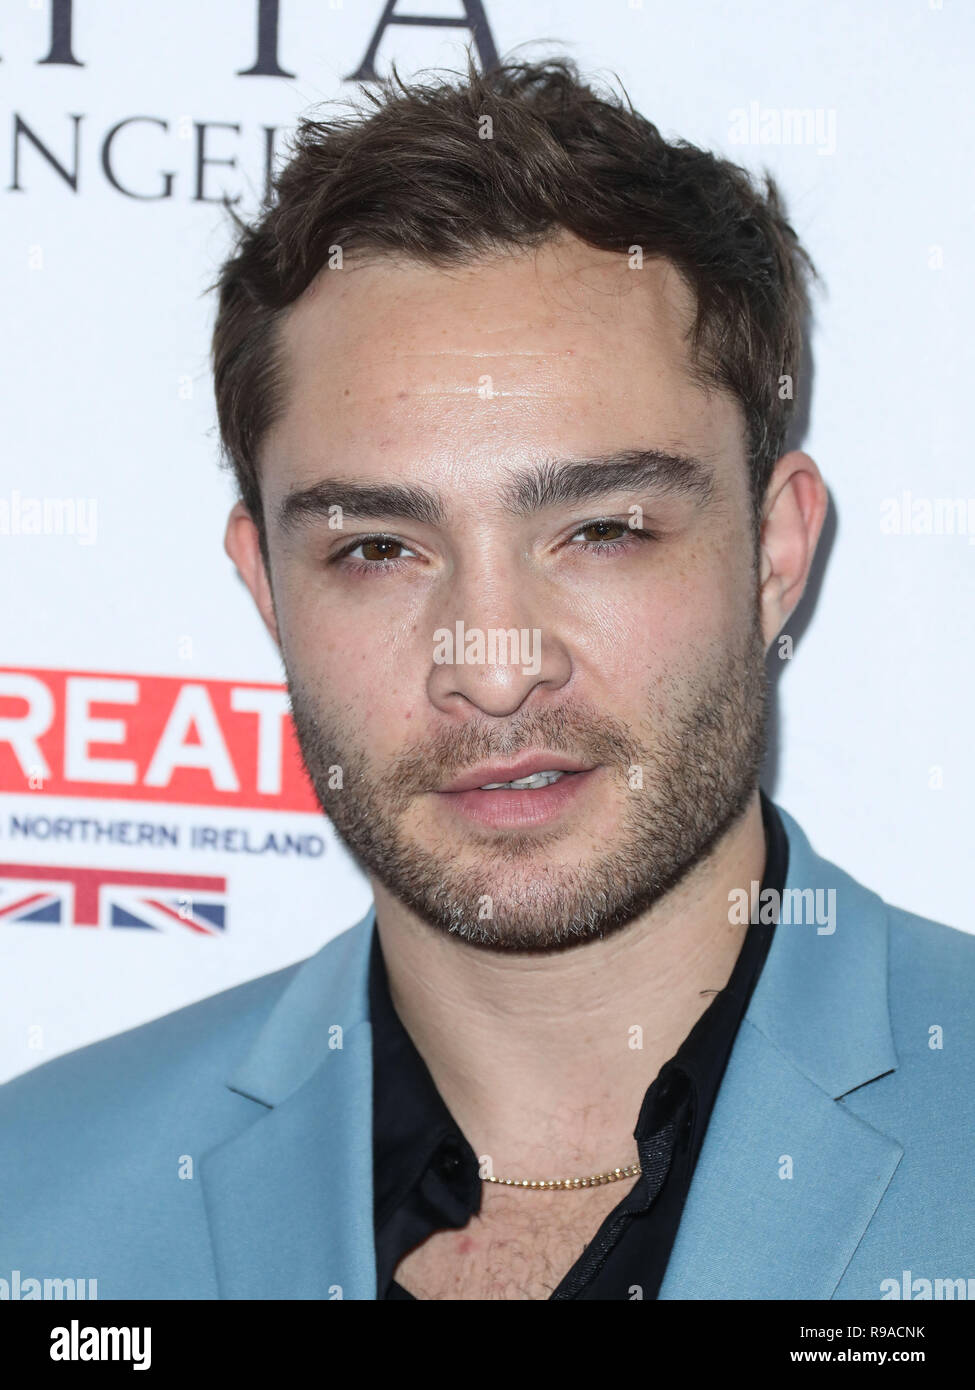 BEVERLY HILLS, LOS ANGELES, CA, USA - SEPTEMBER 16: Actor Ed Westwick  arrives at the BBC America BAFTA Los Angeles TV Tea Party 2017 held at the Beverly Hilton Hotel on September 16, 2017 in Beverly Hills, Los Angeles, California, United States. (Photo by Xavier Collin/Image Press Agency) Stock Photo